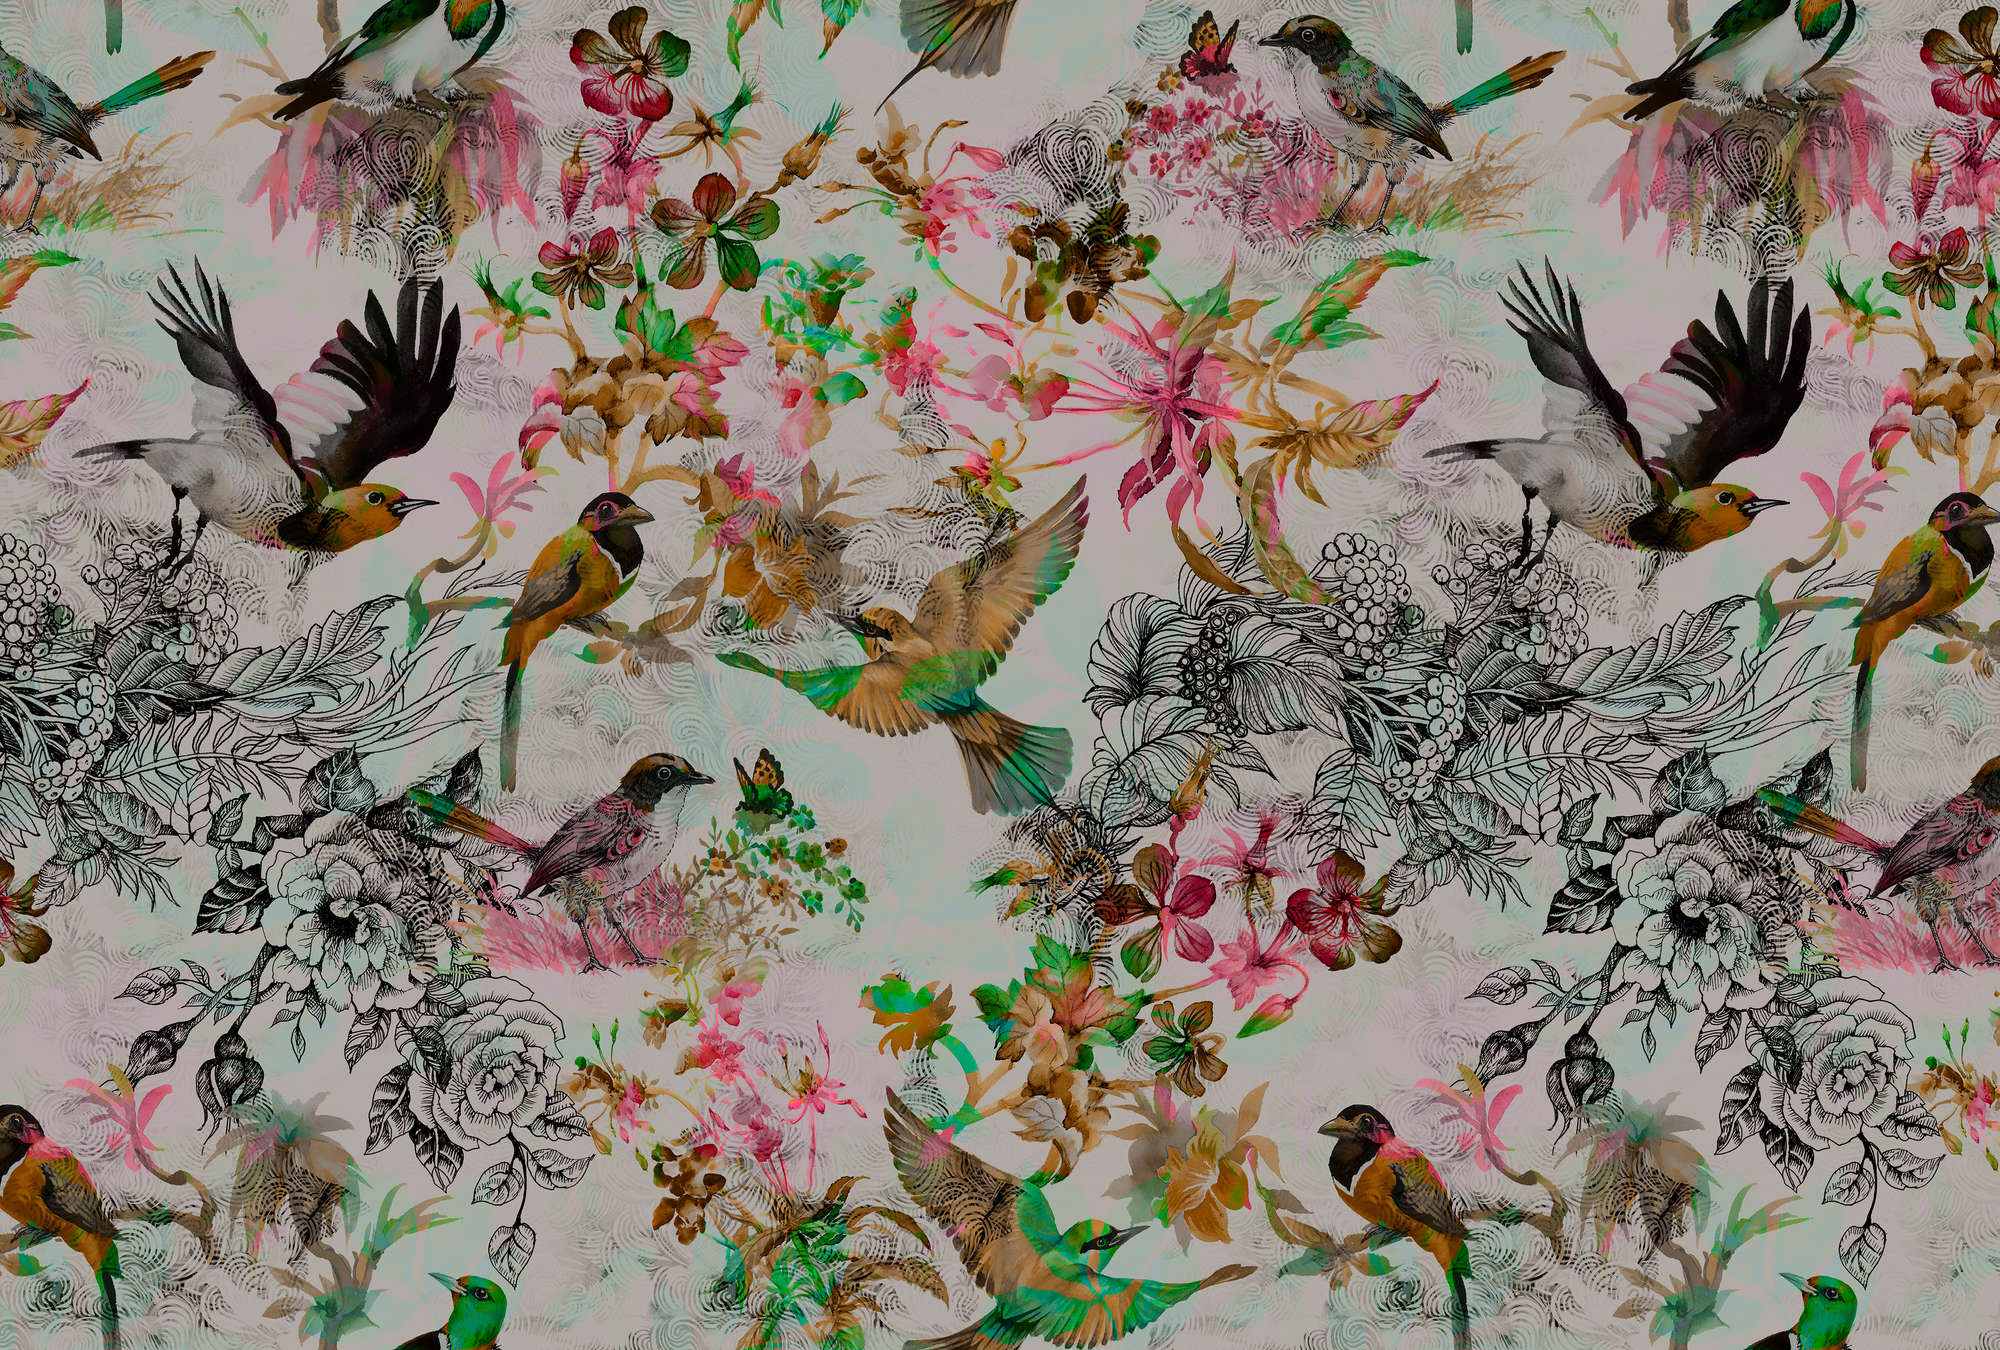             Photo wallpaper birds & flowers collage style - grey, pink
        